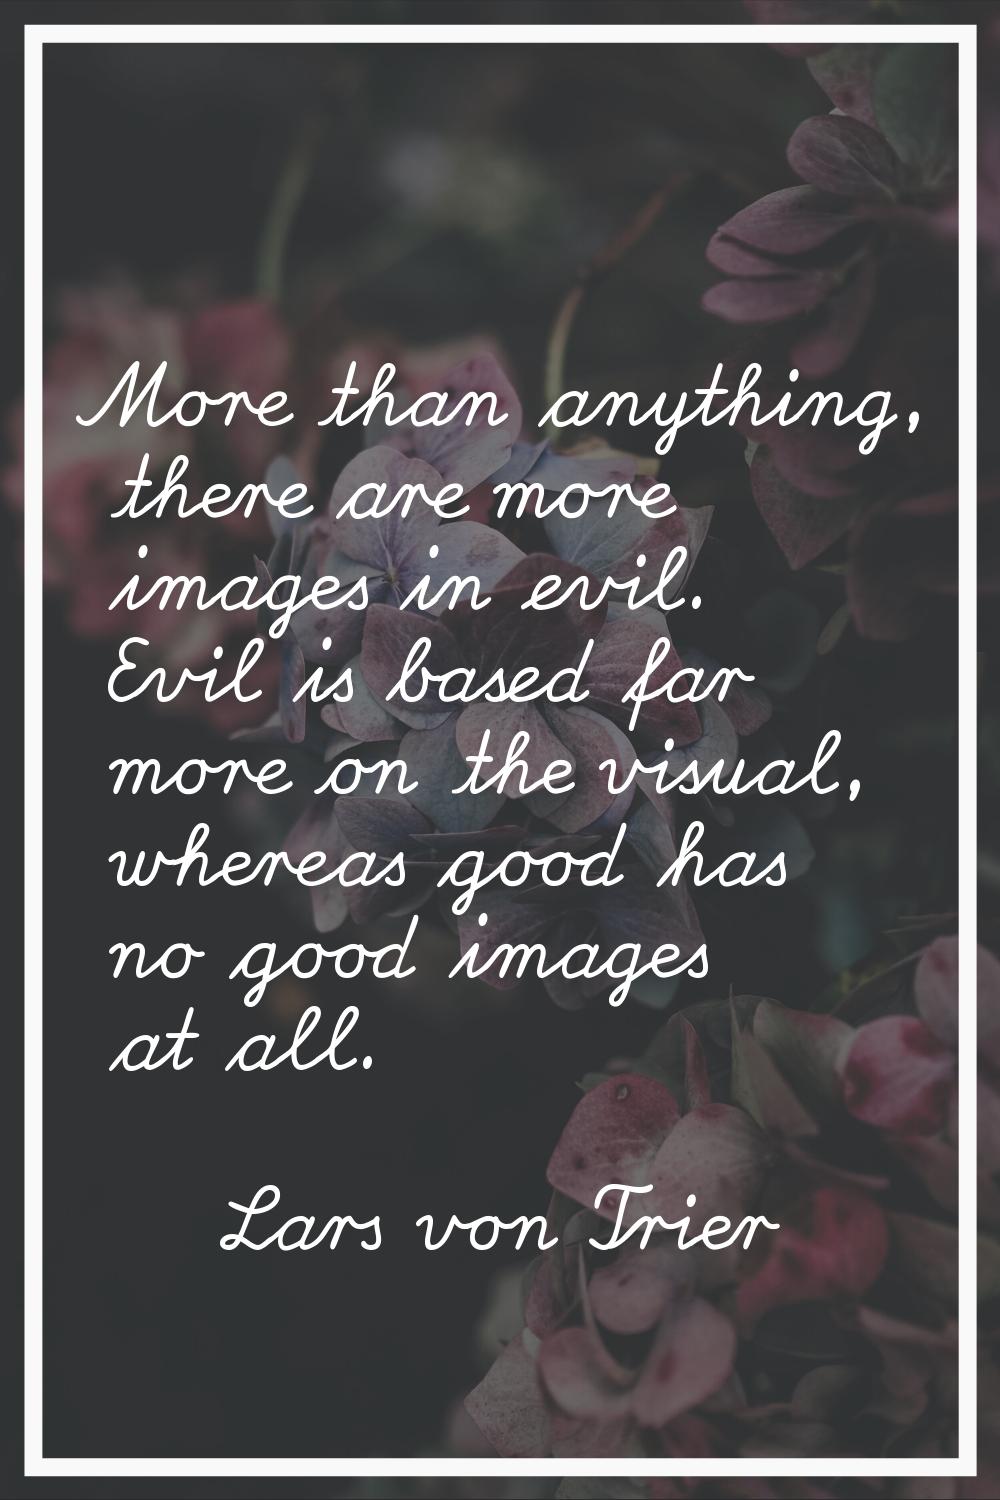 More than anything, there are more images in evil. Evil is based far more on the visual, whereas go